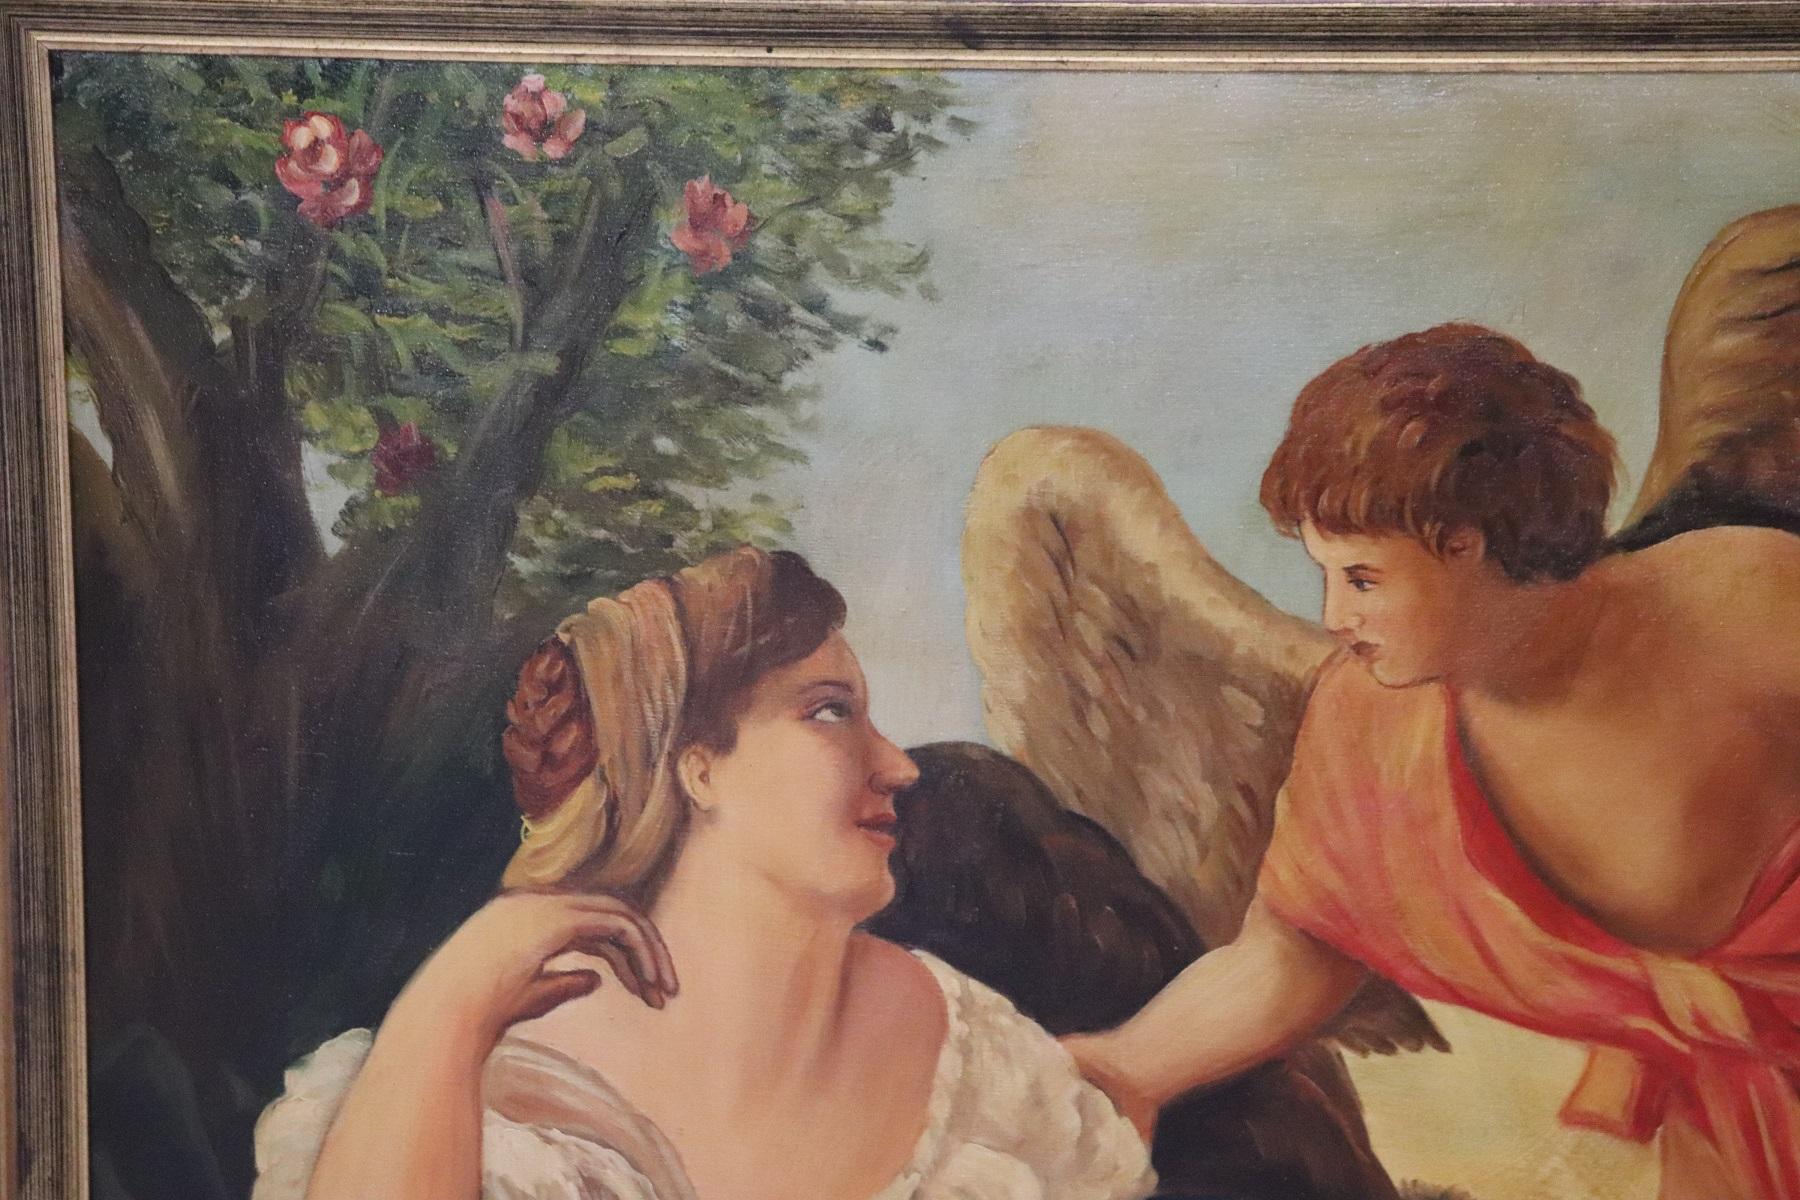 Beautiful large oil painting on canvas. Excellent pictorial quality. Signed by Sotti Santino an Italian important artist. A beautiful religious scene 